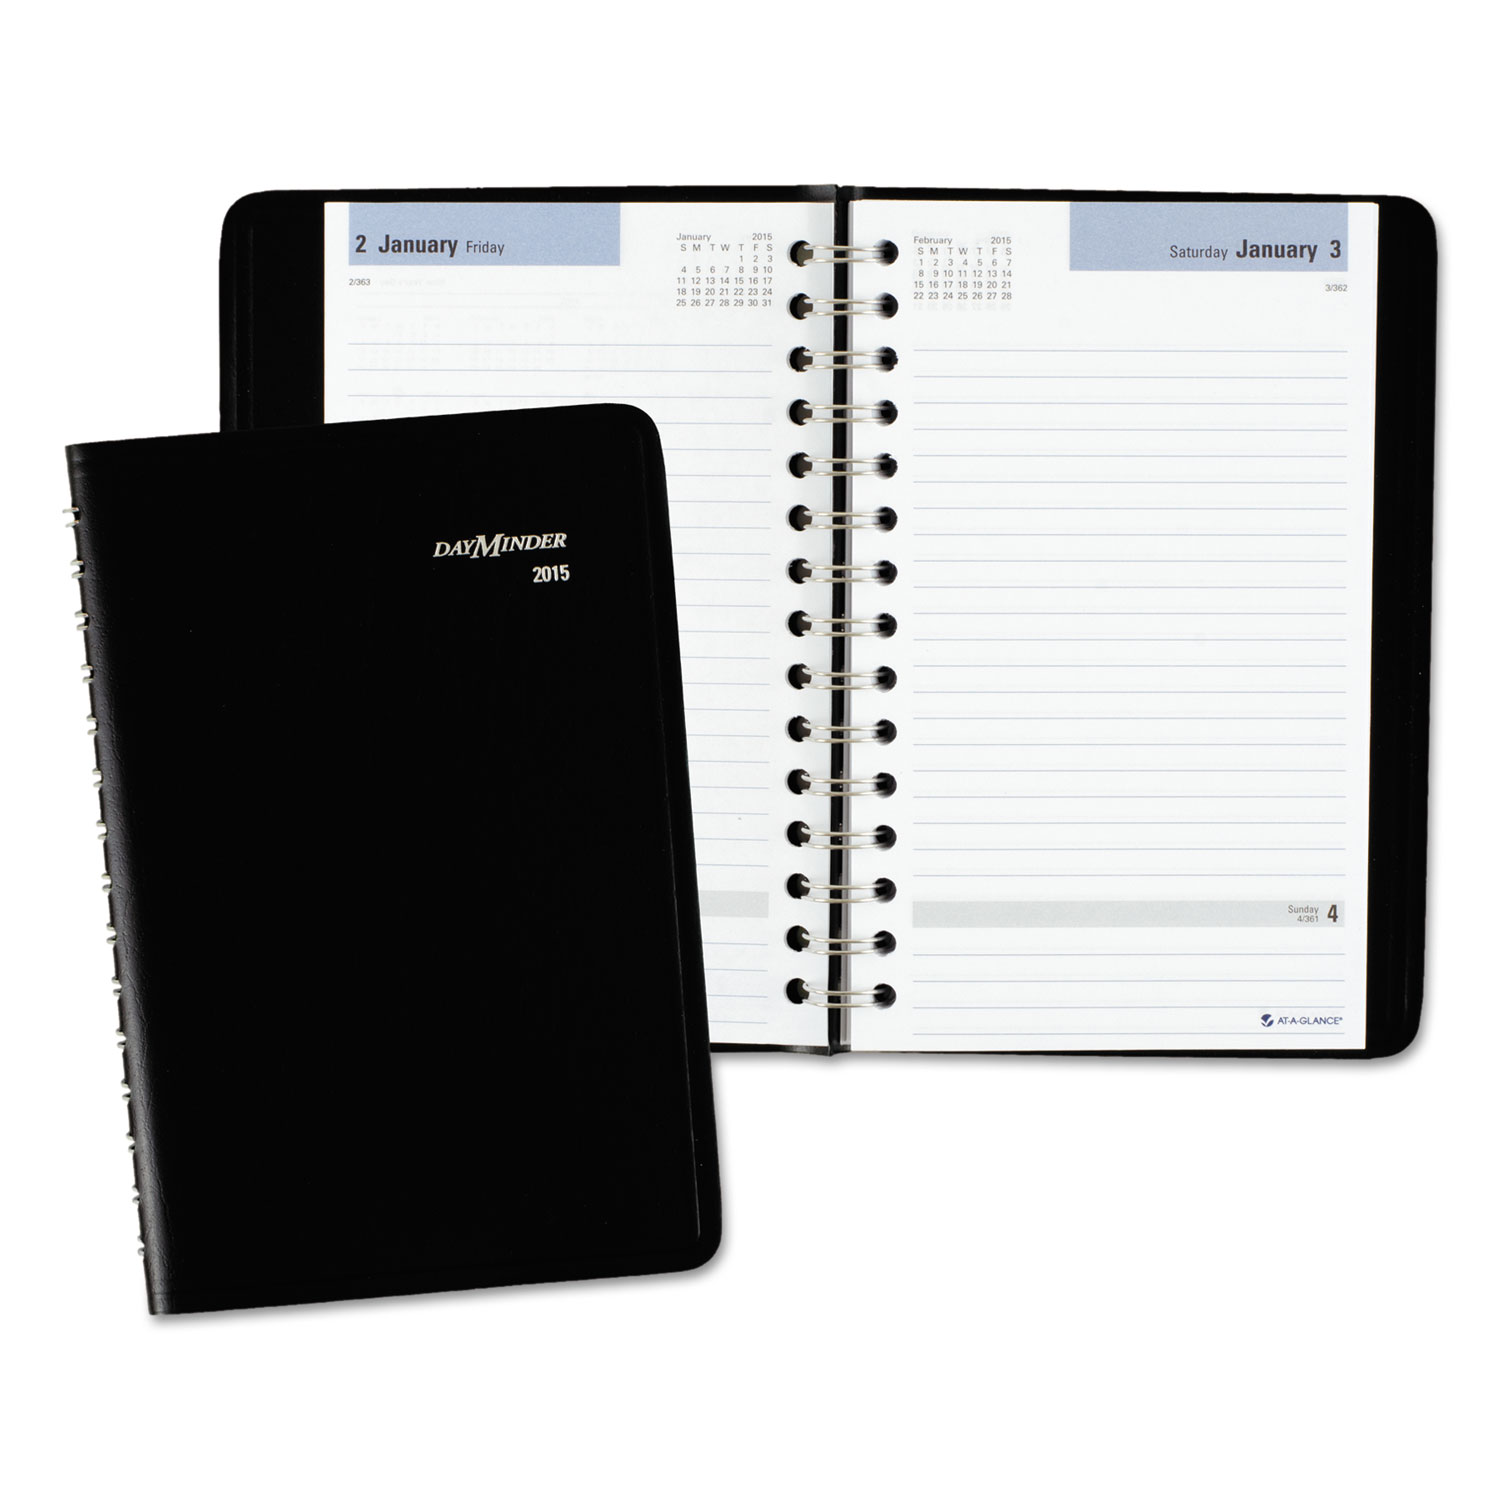 DayMinder AAGSK4600 Daily Appointment Book with Open Scheduling, 8 x 4 7/8, Black, 2017